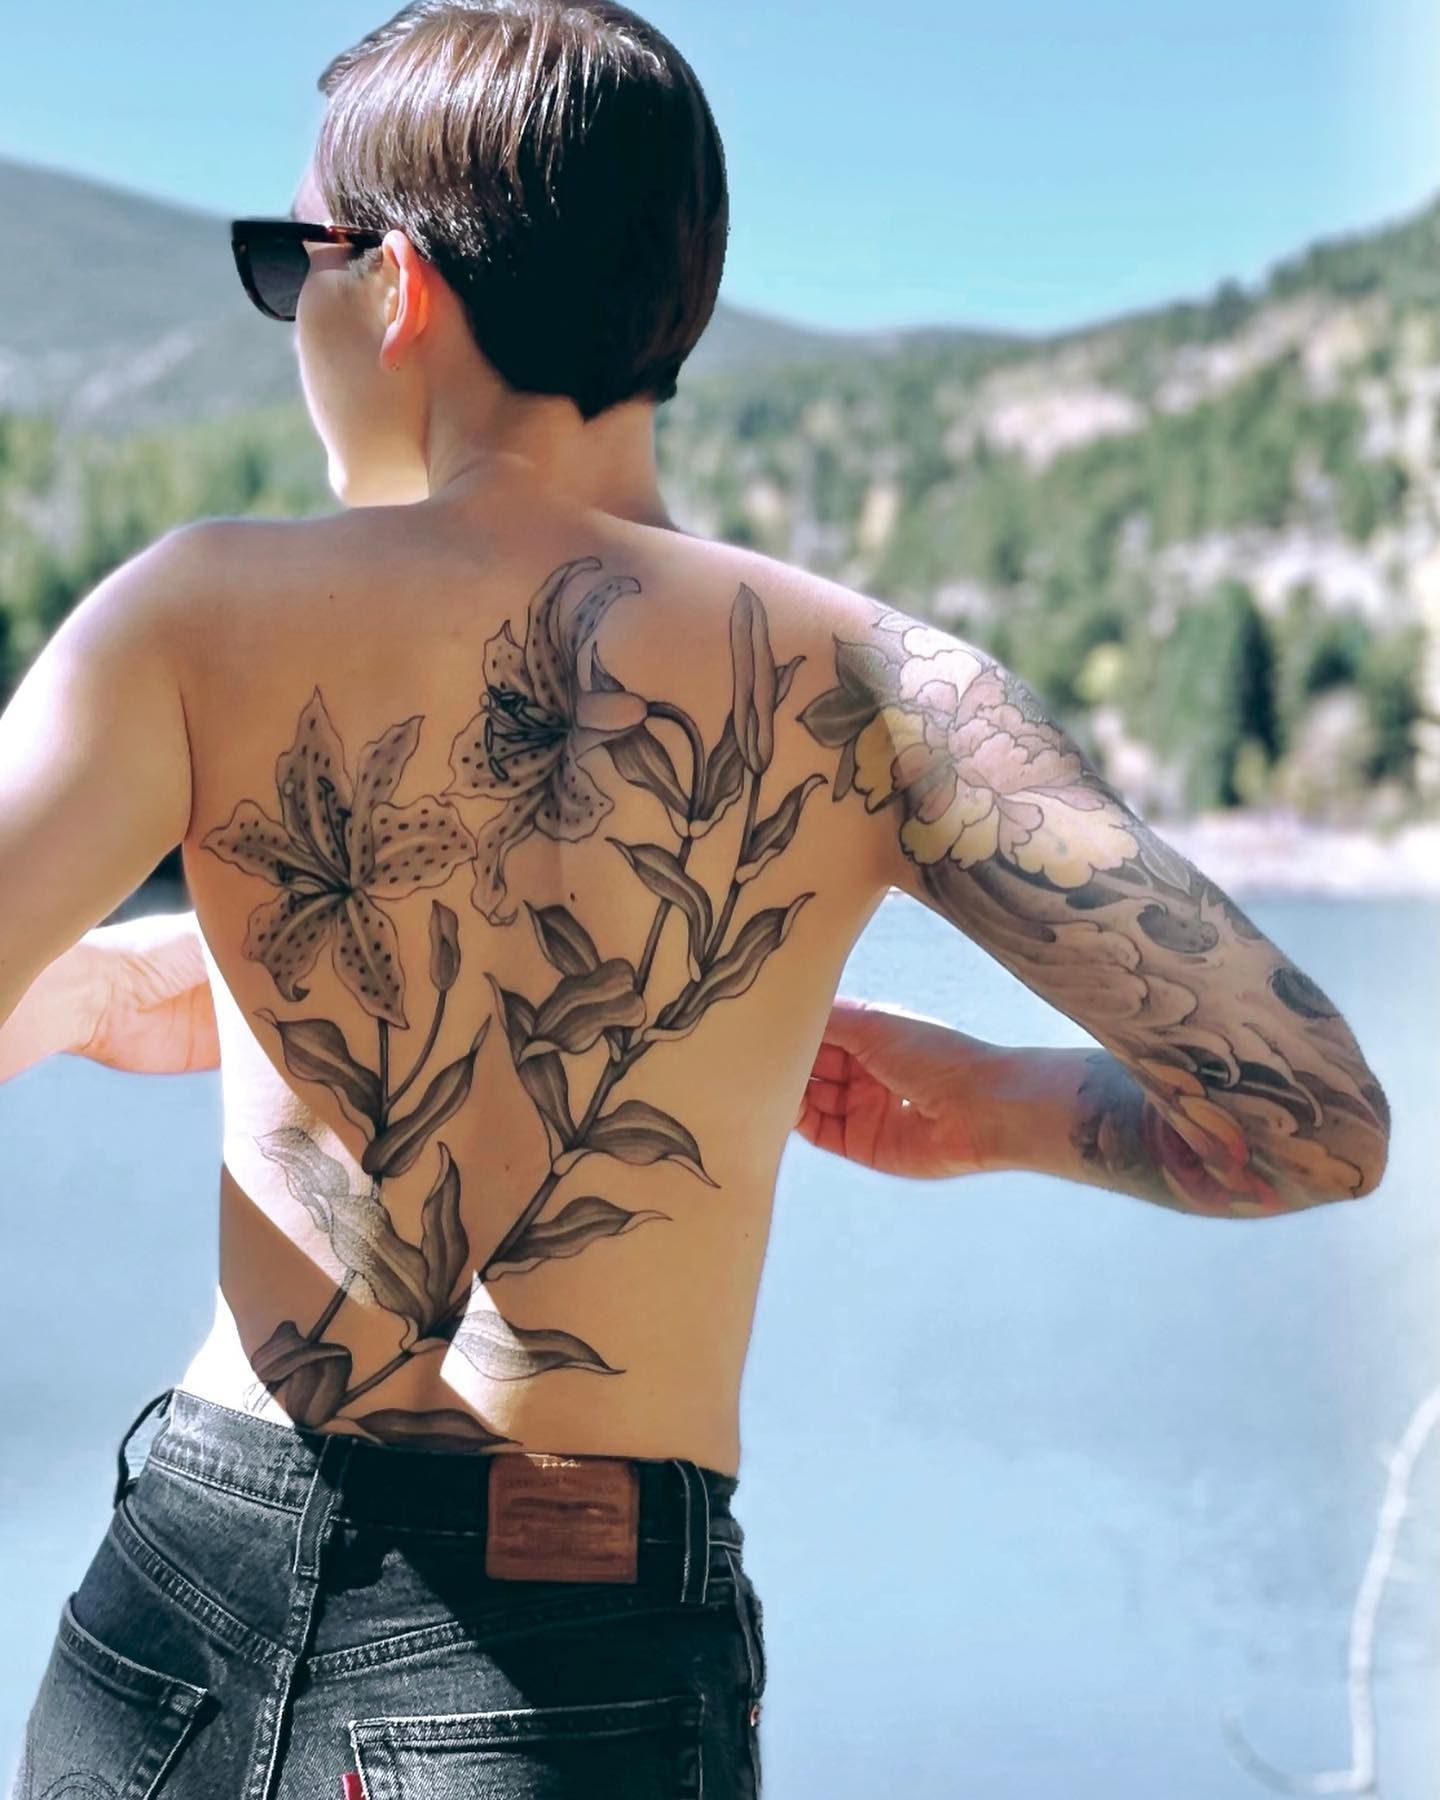 Tattoo aftercare 101: How to take care of your new ink